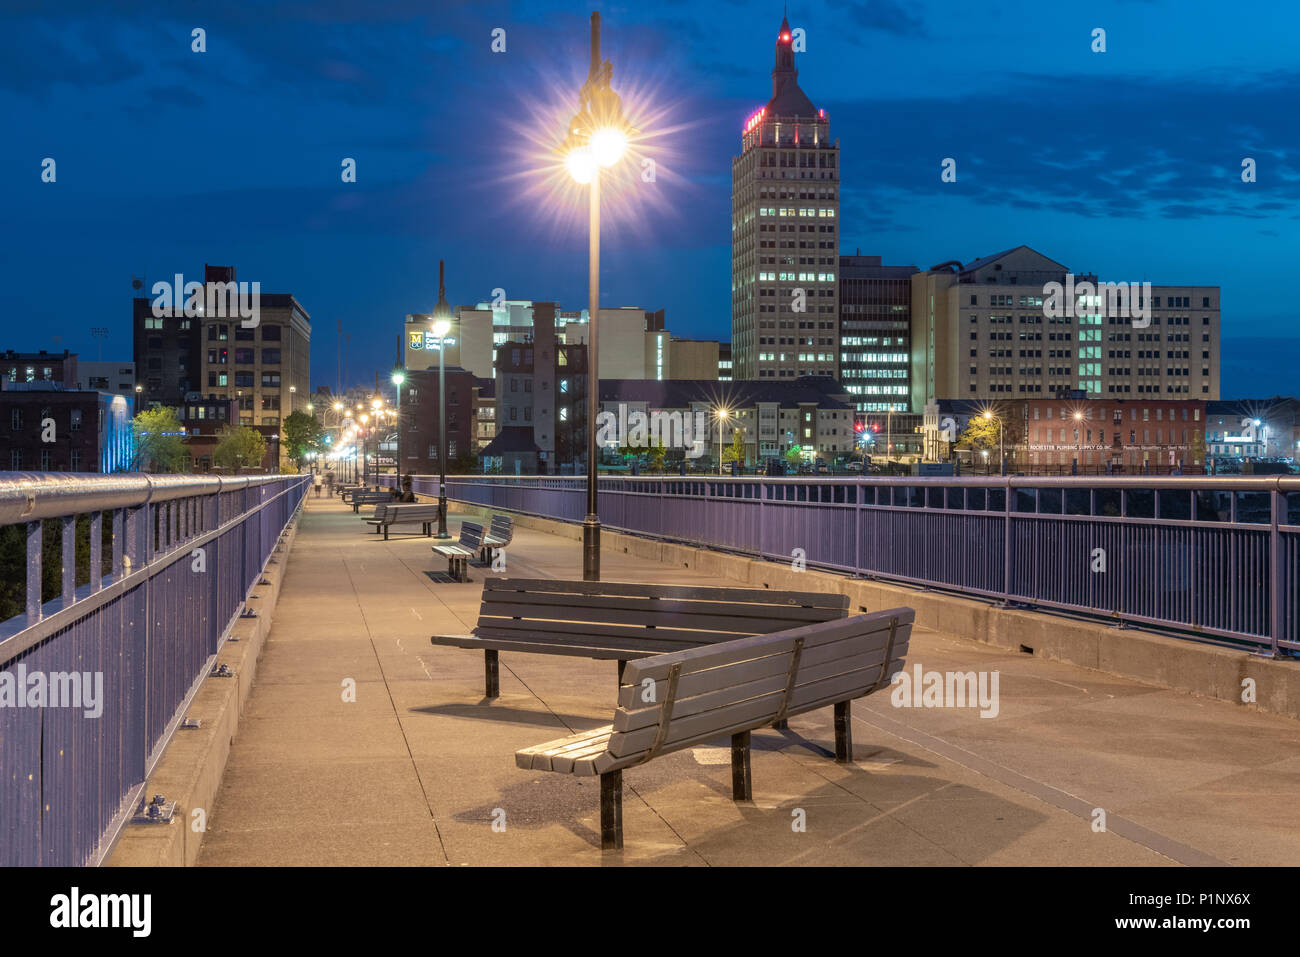 ROCHESTER, NY - MAY 14, 2018: Skyline of Rochester, New York along the Pont De Rennes Pedestrian Bridge which is part of the Genesee Riverway Trail at Stock Photo